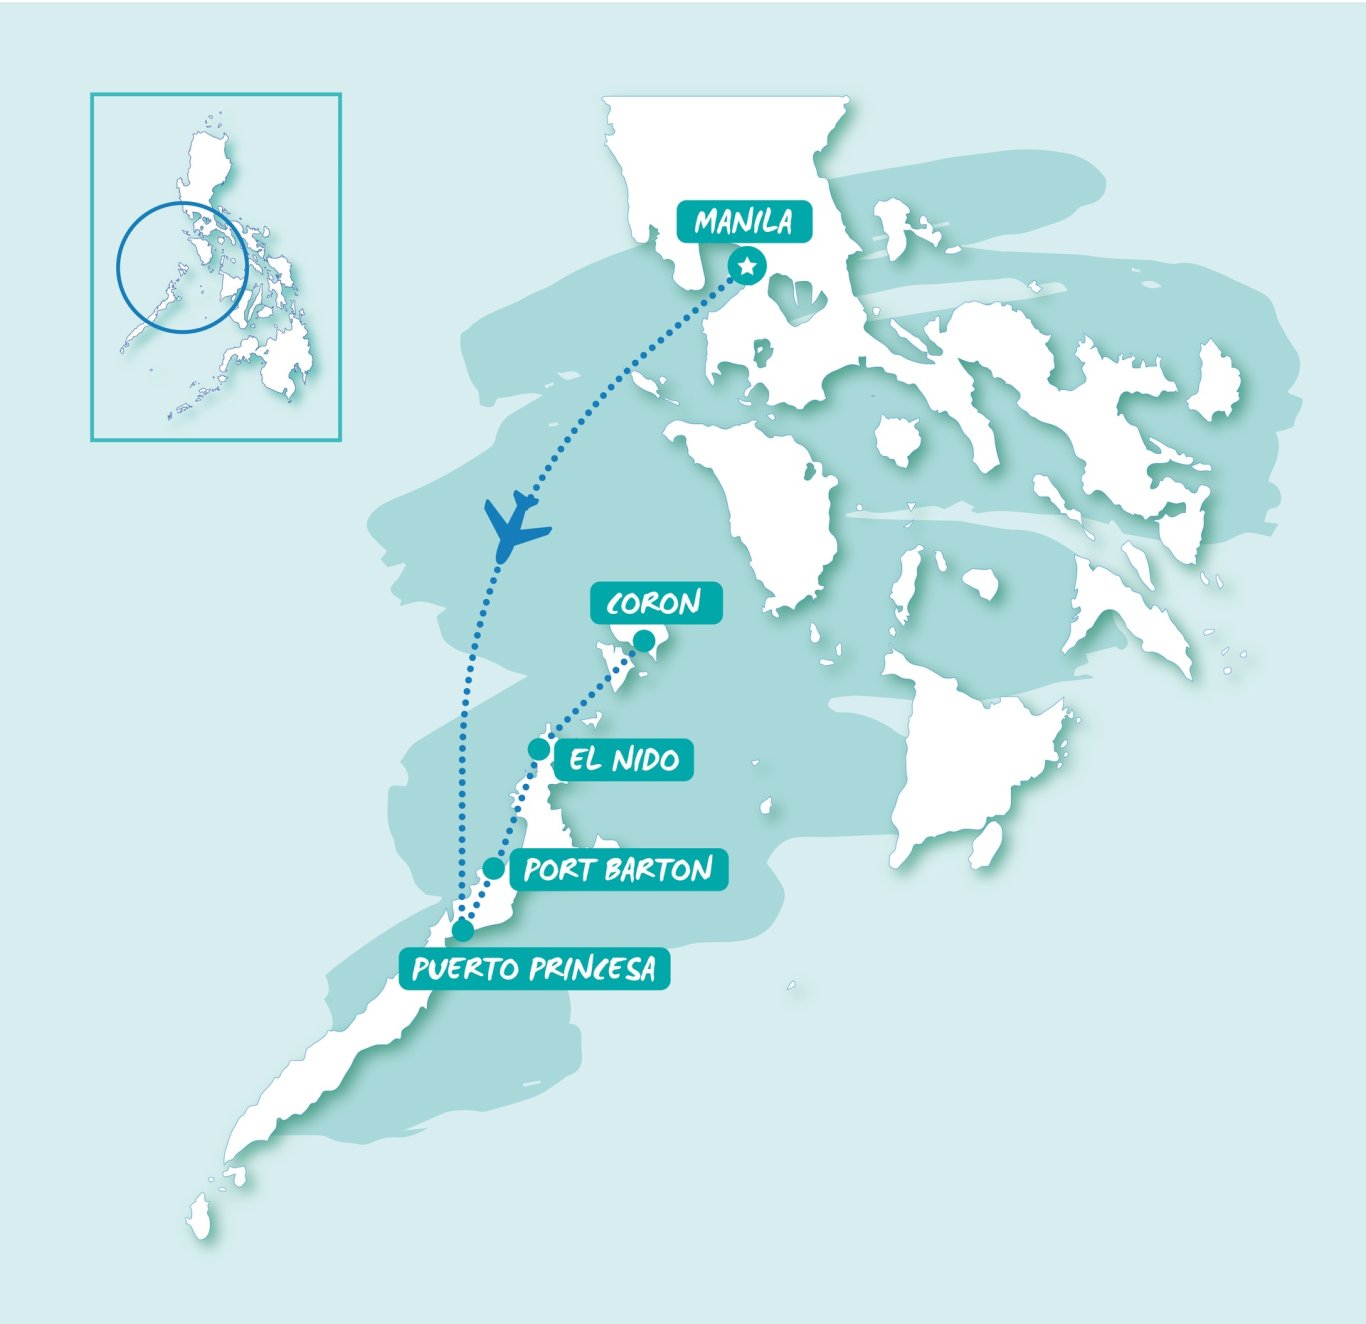 Map of TruTravels Philippines West trip showing route of the tour